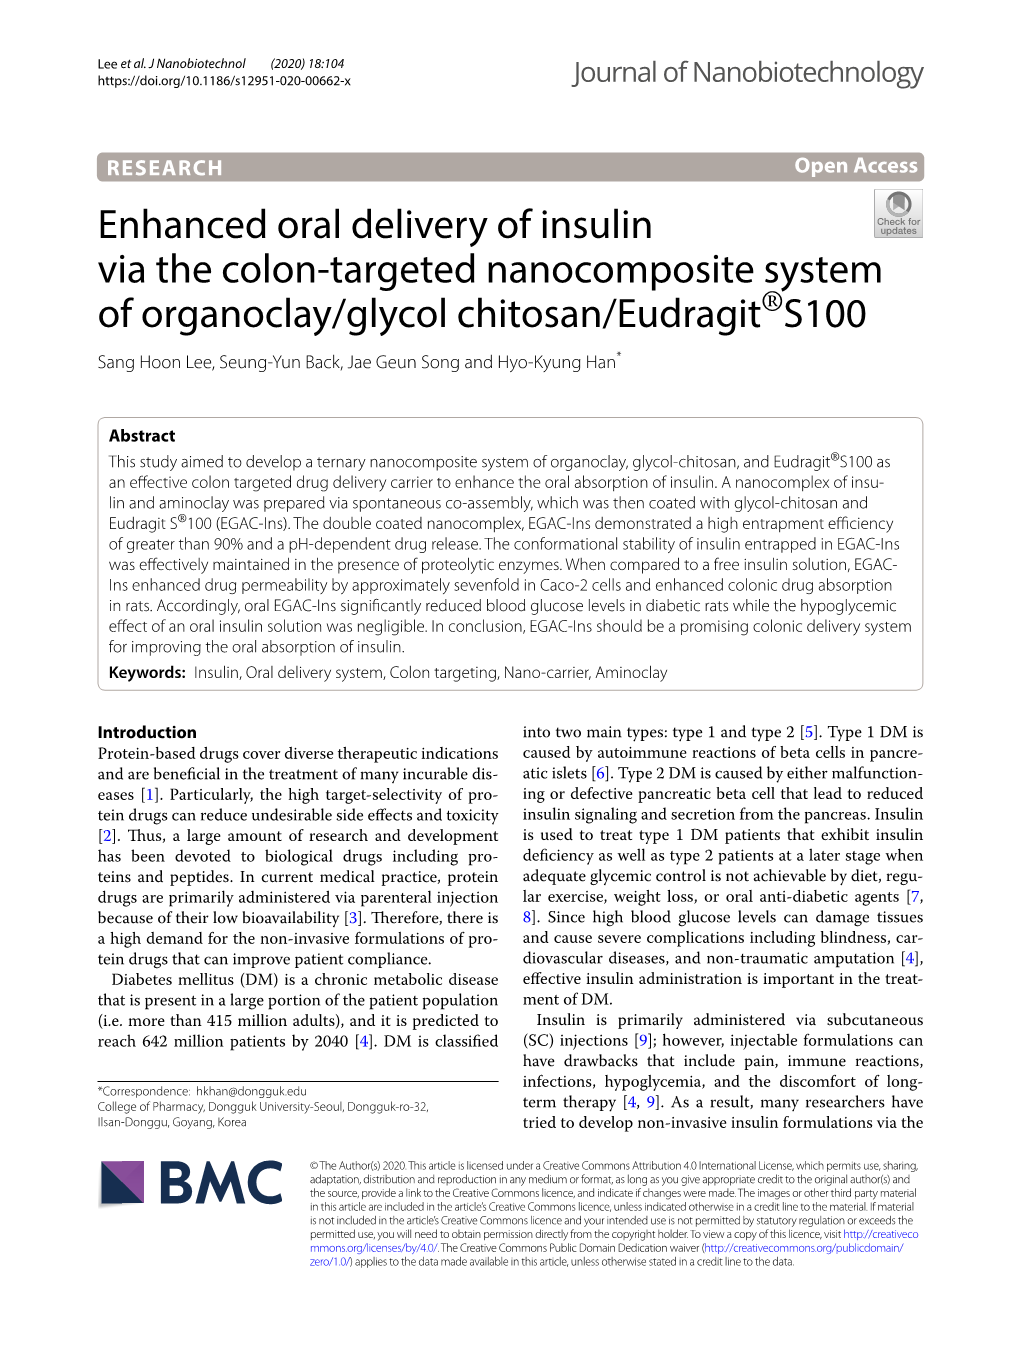 Enhanced Oral Delivery of Insulin Via the Colon-Targeted Nanocomposite